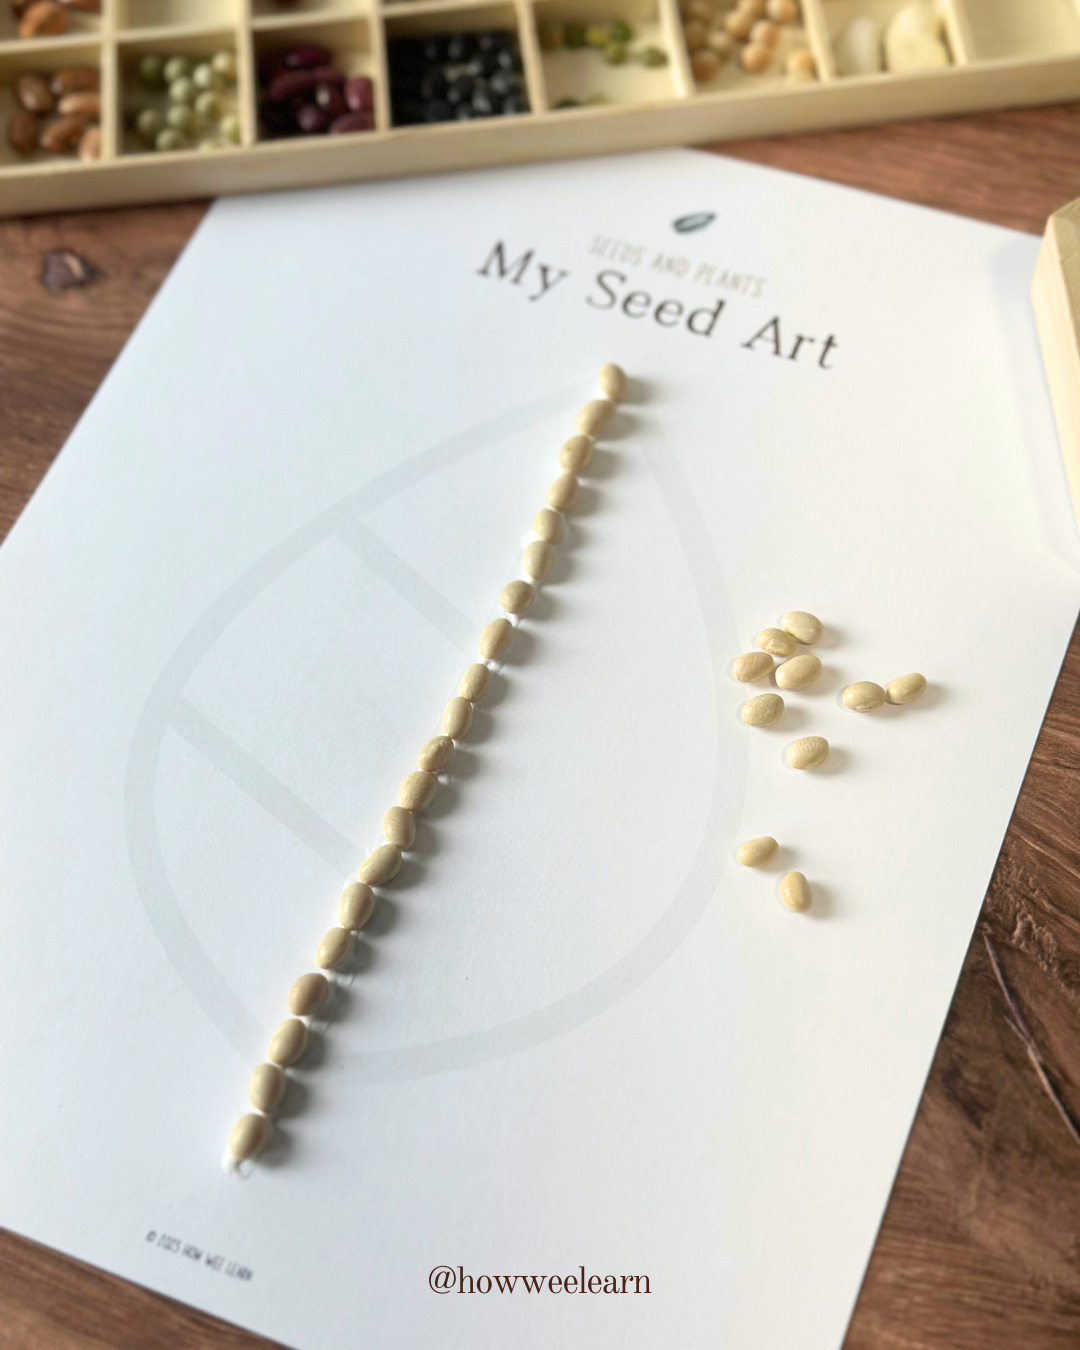 Seed Art from the Seeds and Plants Family Unit Study showing gluing the seeds down to create an outline